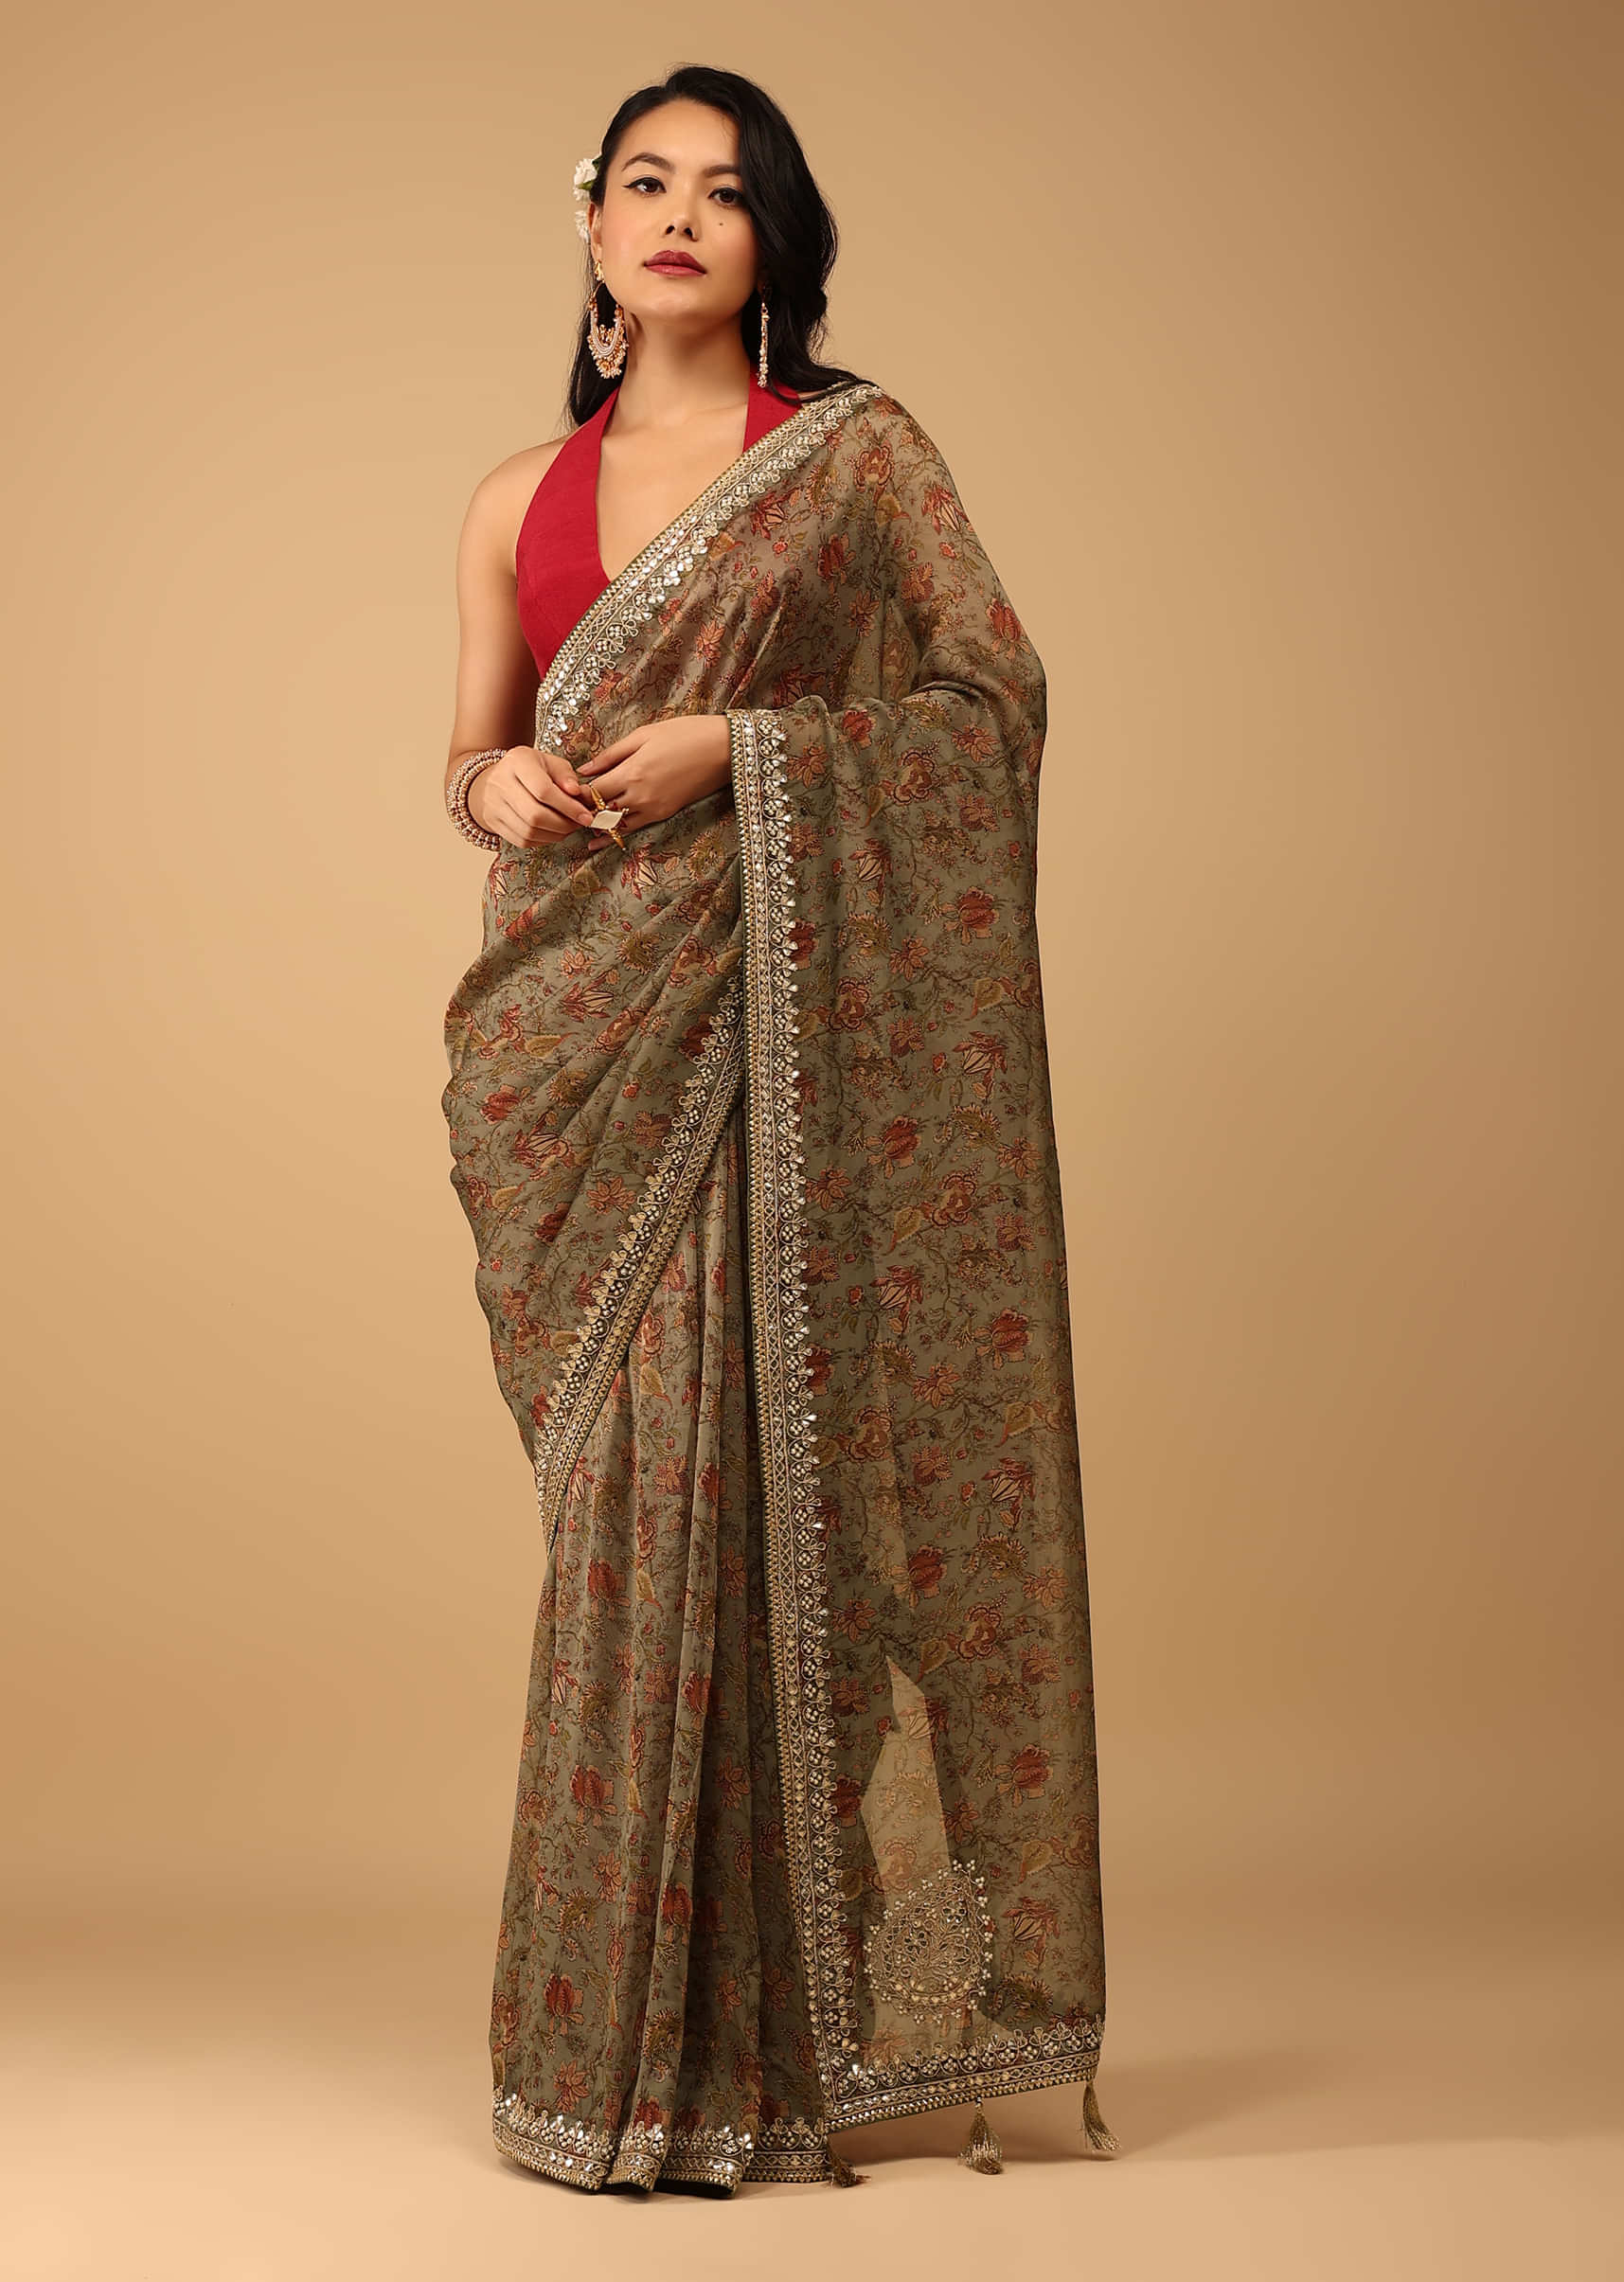 Kalki Vetiver Green Saree In Crepe With Floral Handblock Print And Embroidery